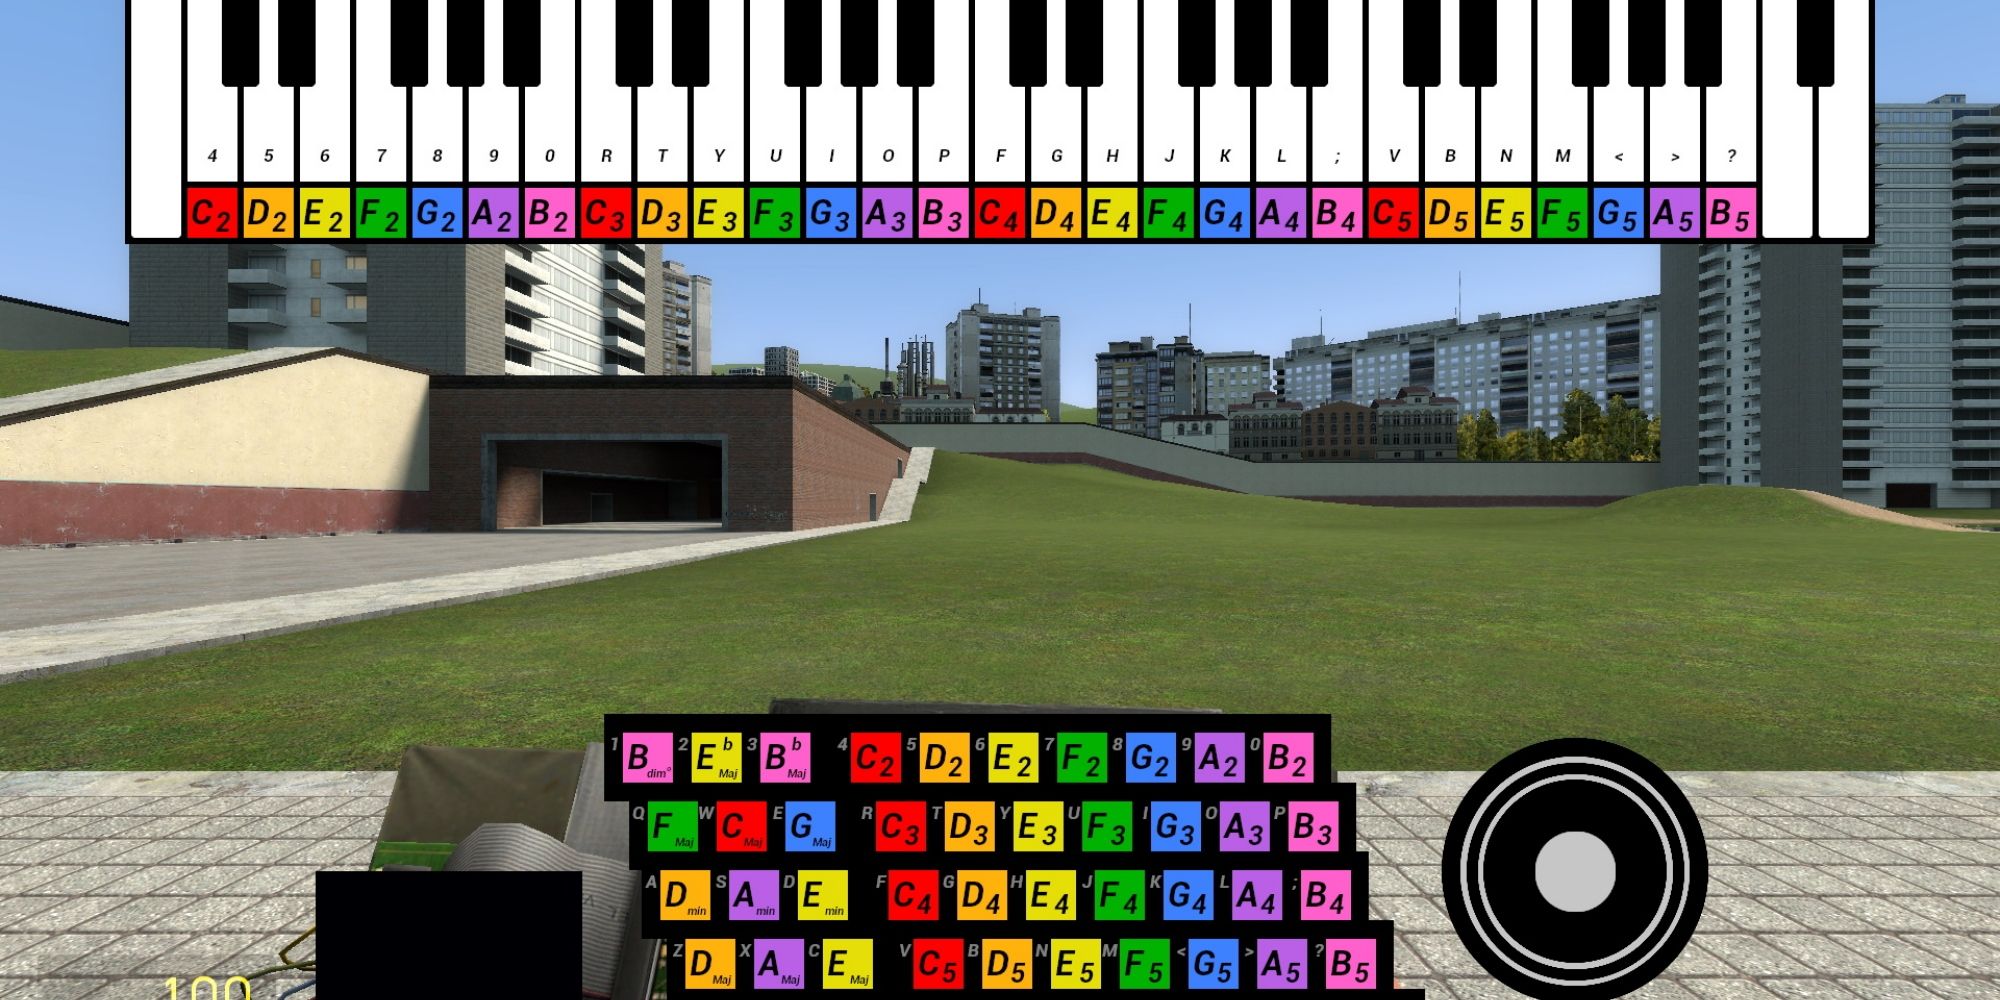 a piano keyboard at the top of the screen with a matching keyboard on the bottom to show the corresponding notes